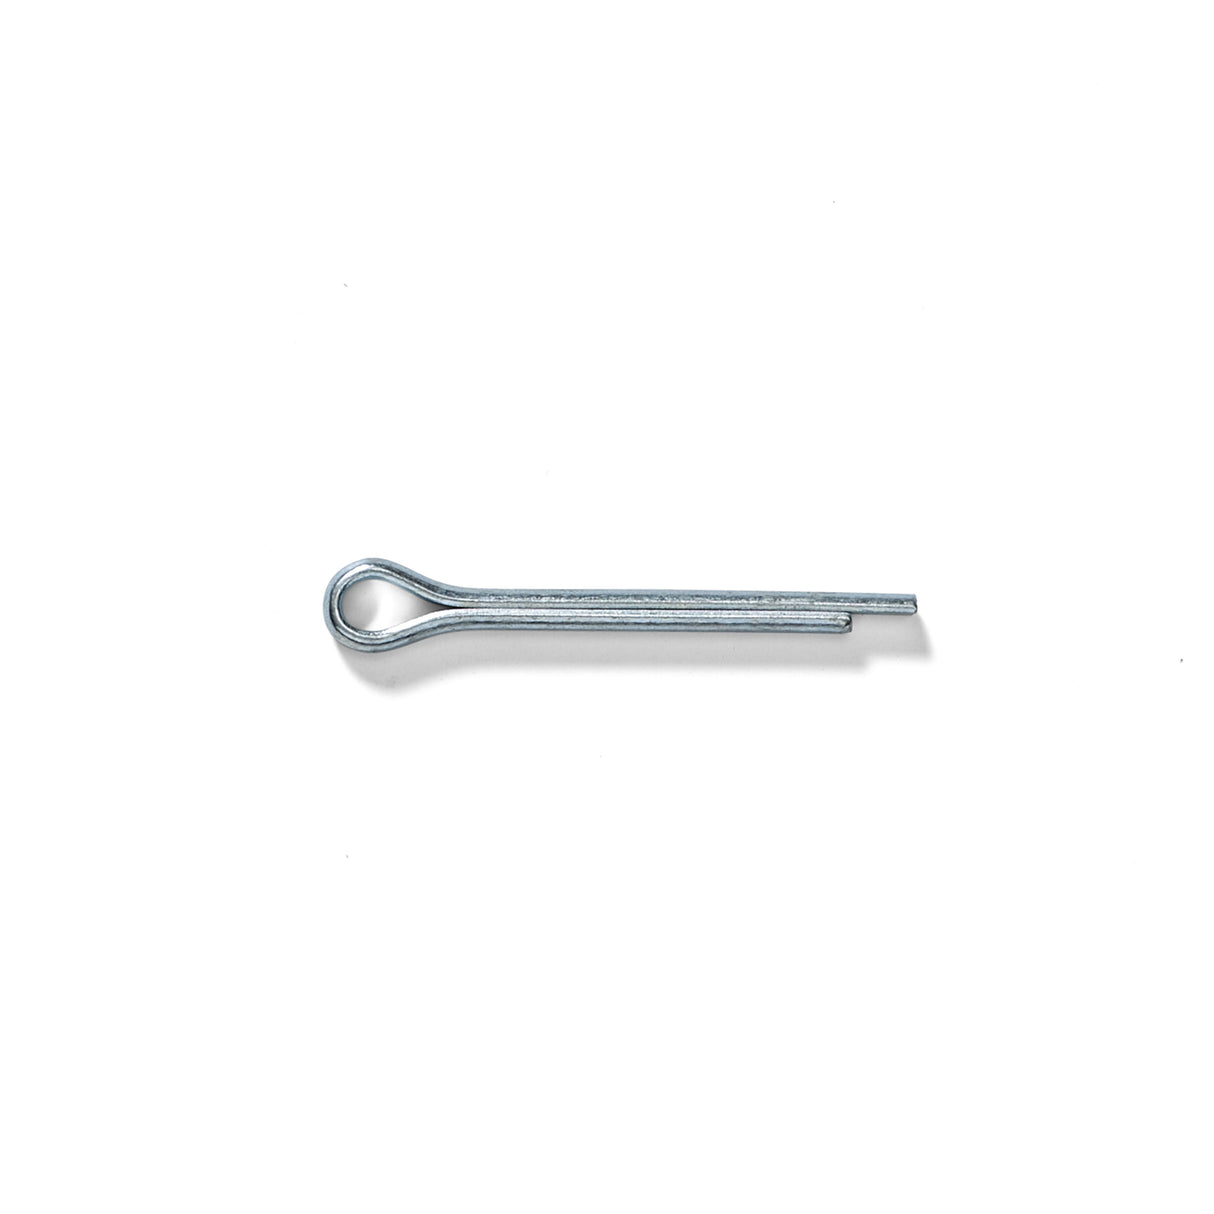 Cotter pin for CM-2 and CM-3 mooring iron shackle